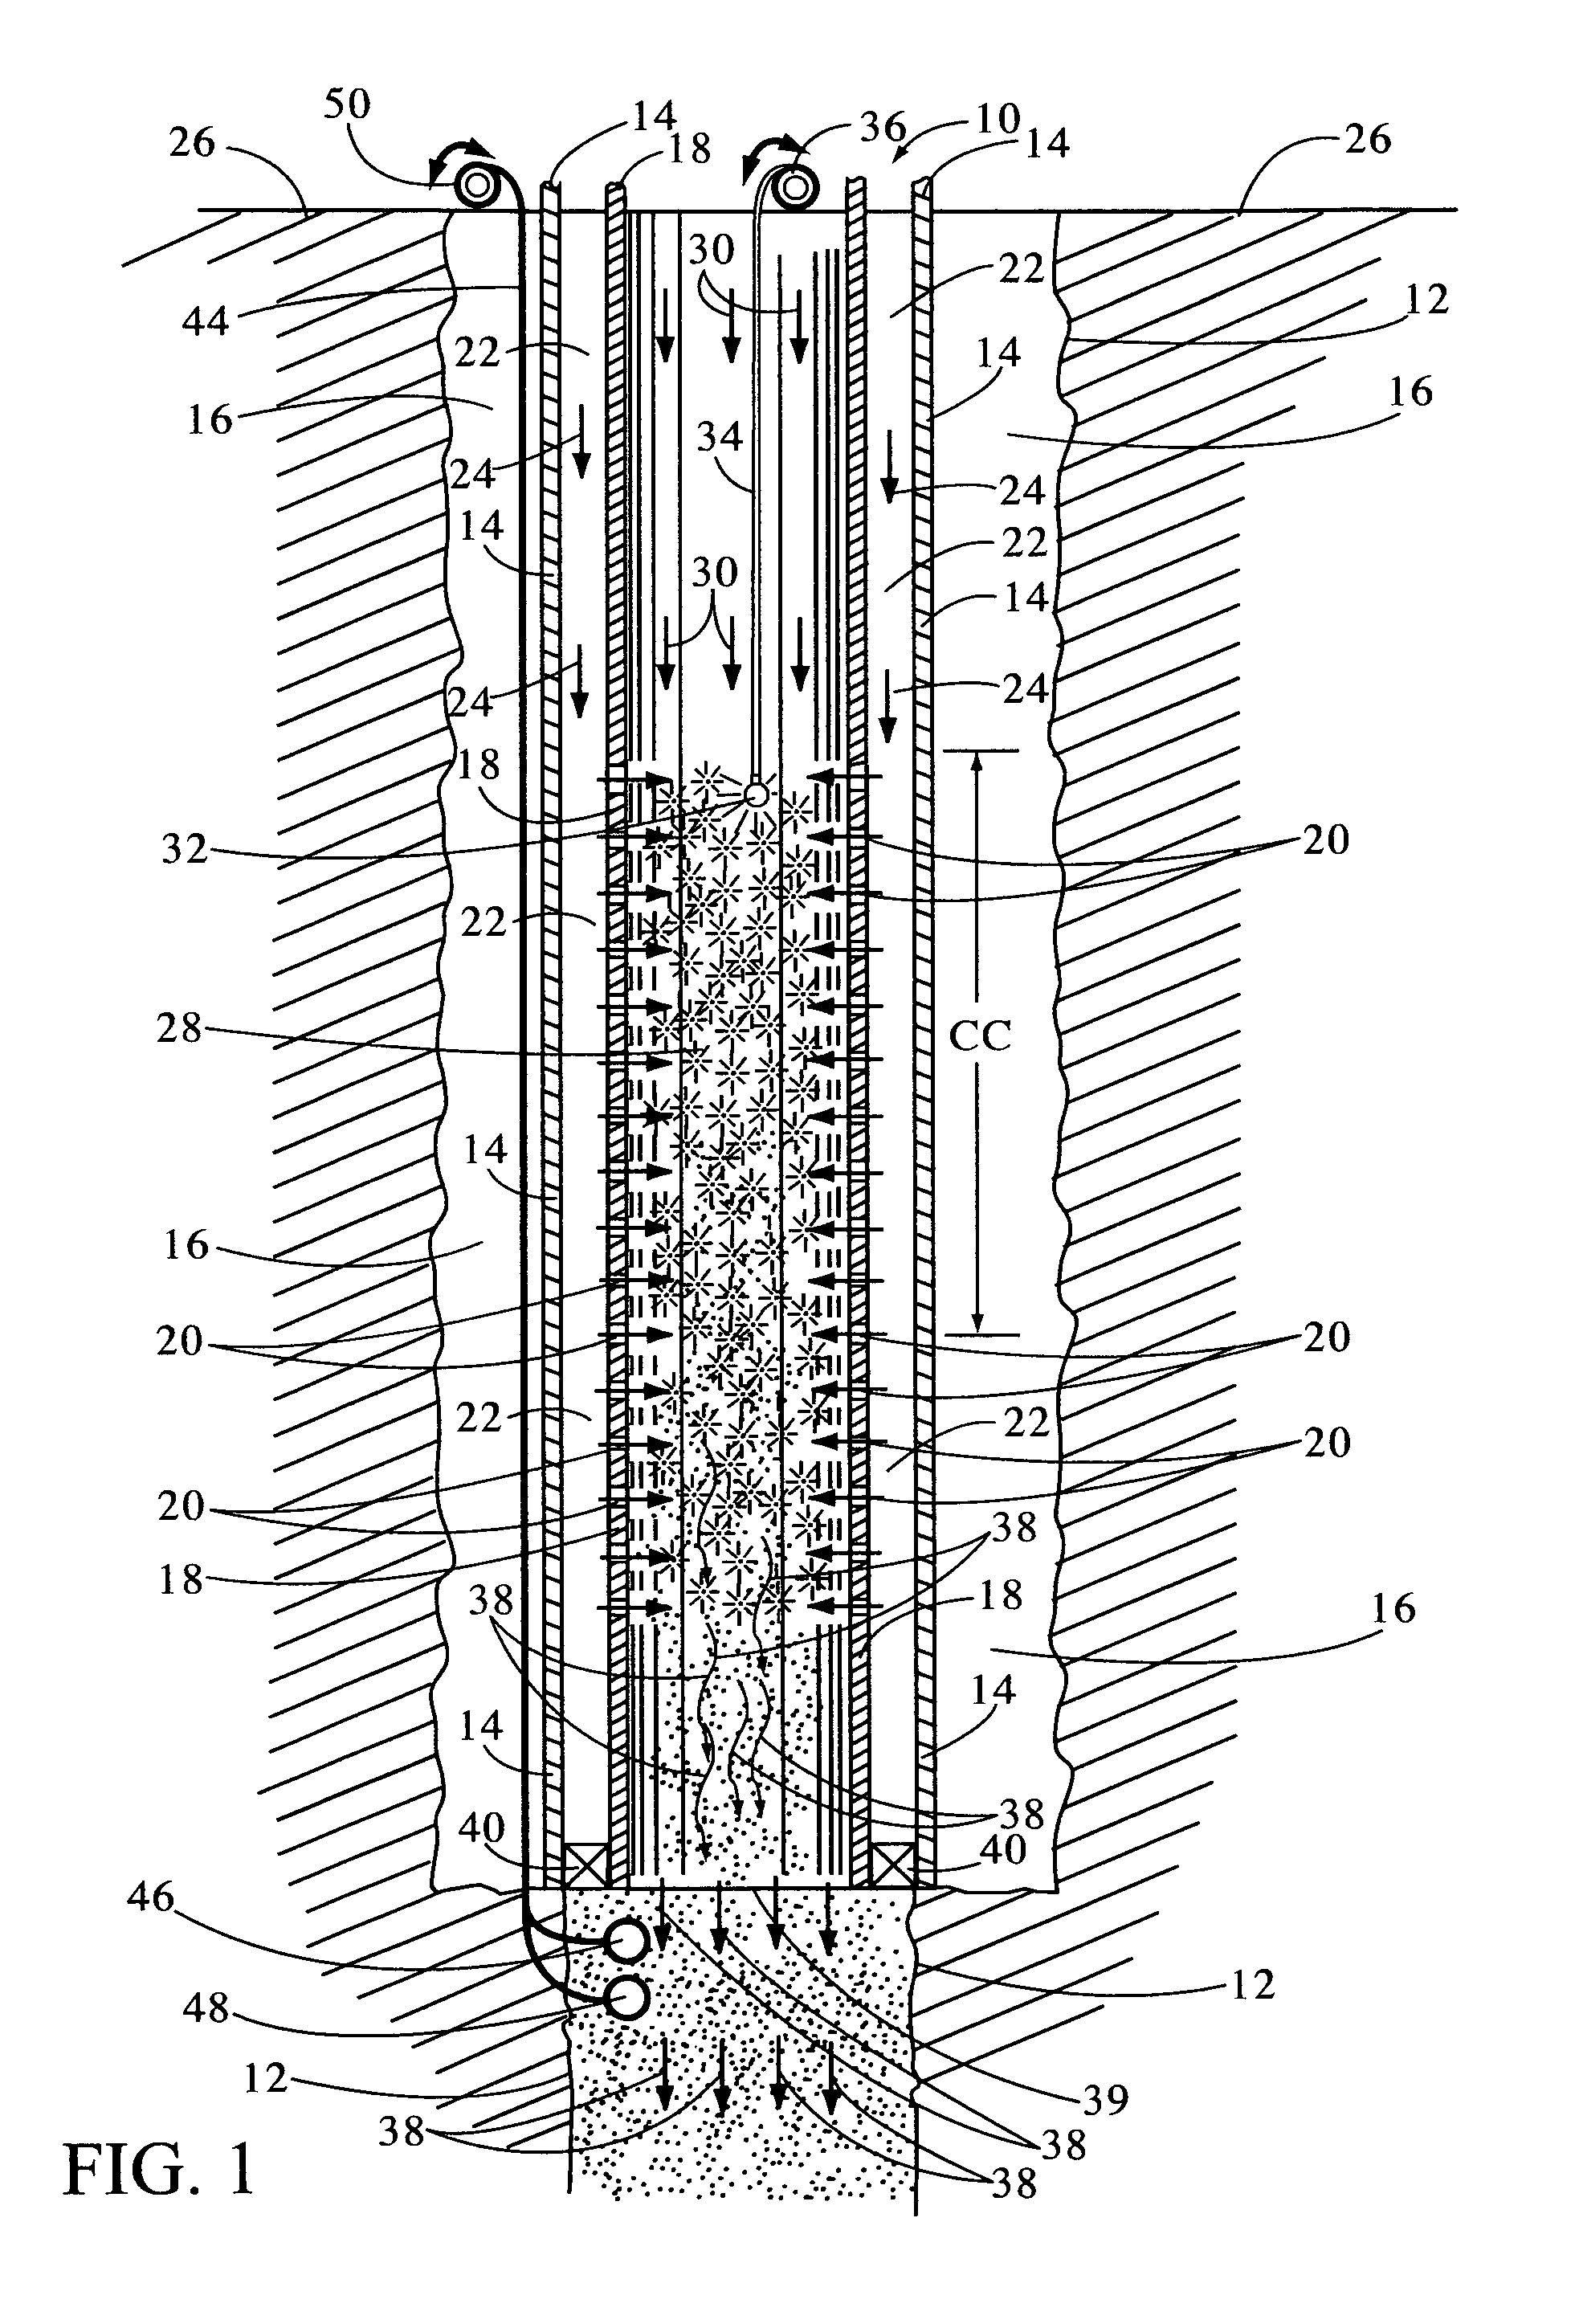 Downhole combustion unit and process for TECF injection into carbonaceous permeable zones